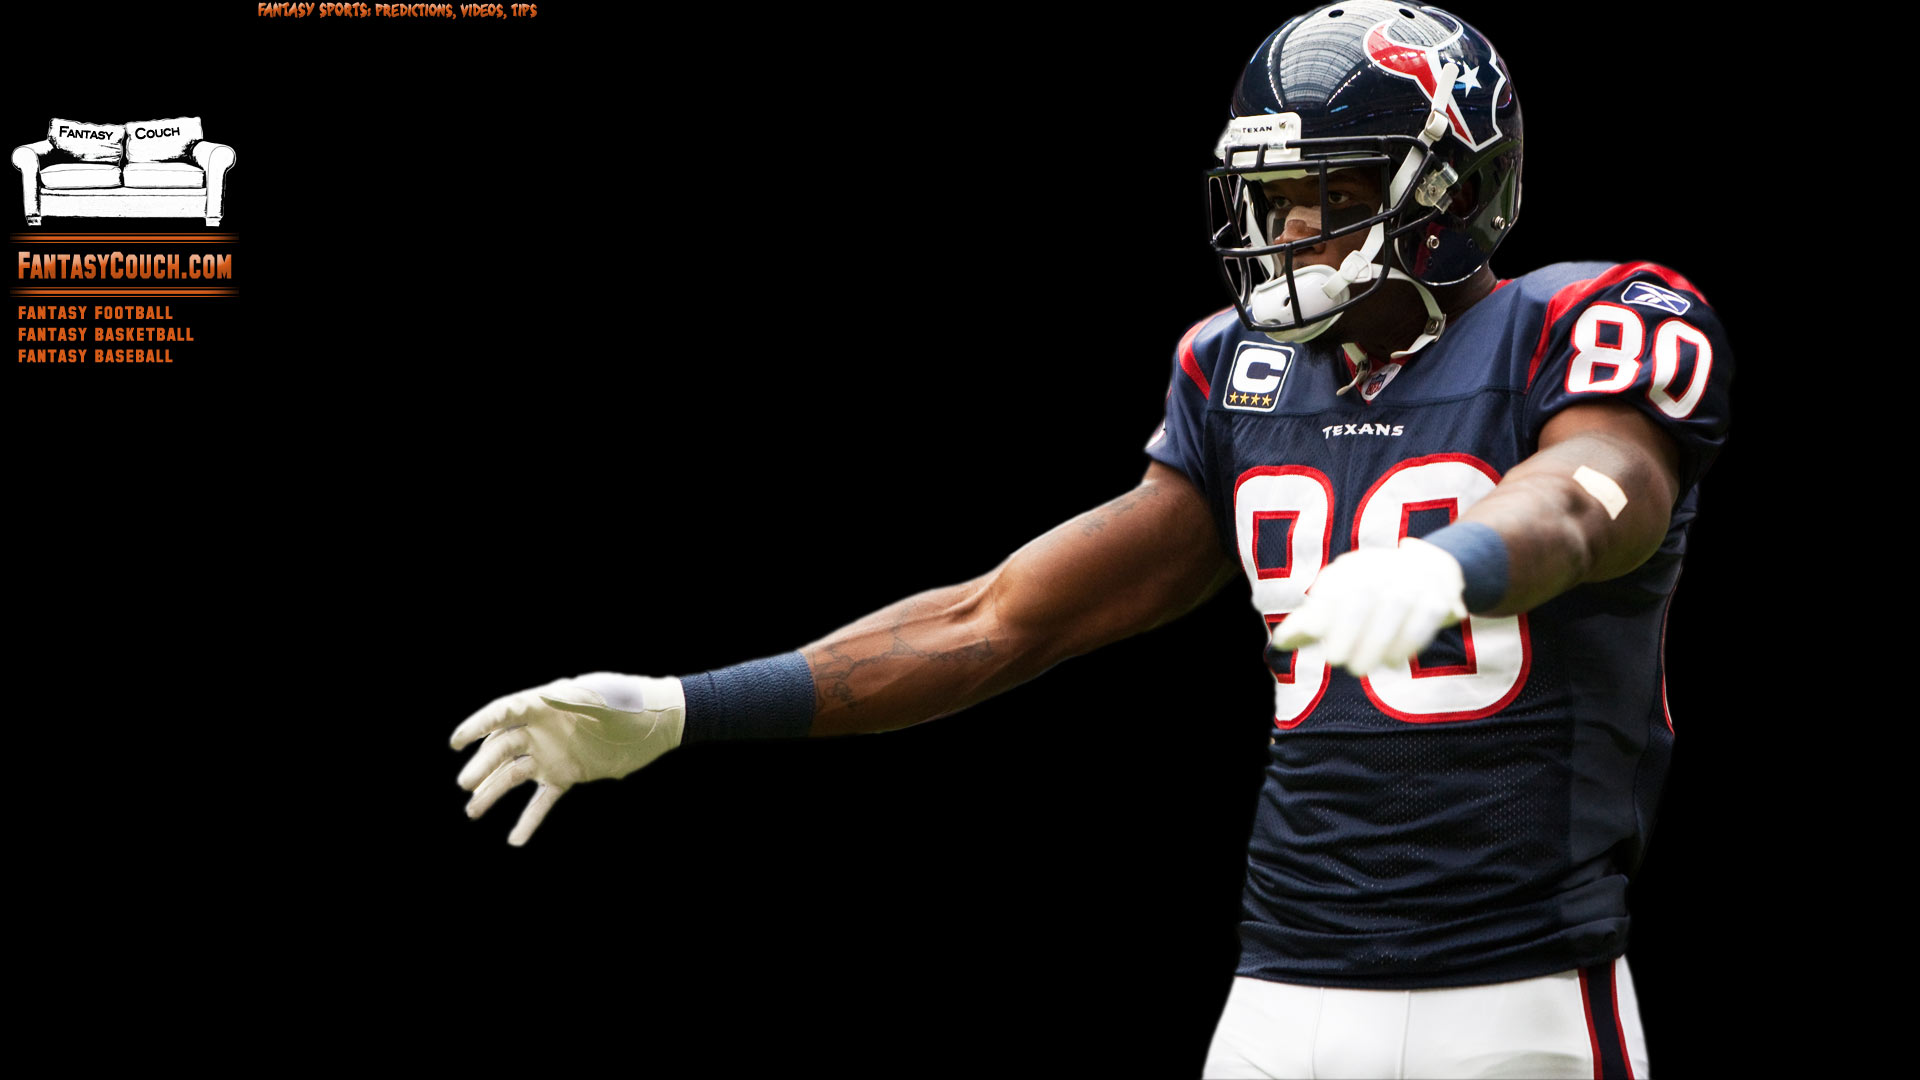 Nfl Fantasy Football Background Of Andre Johnson Over A Black